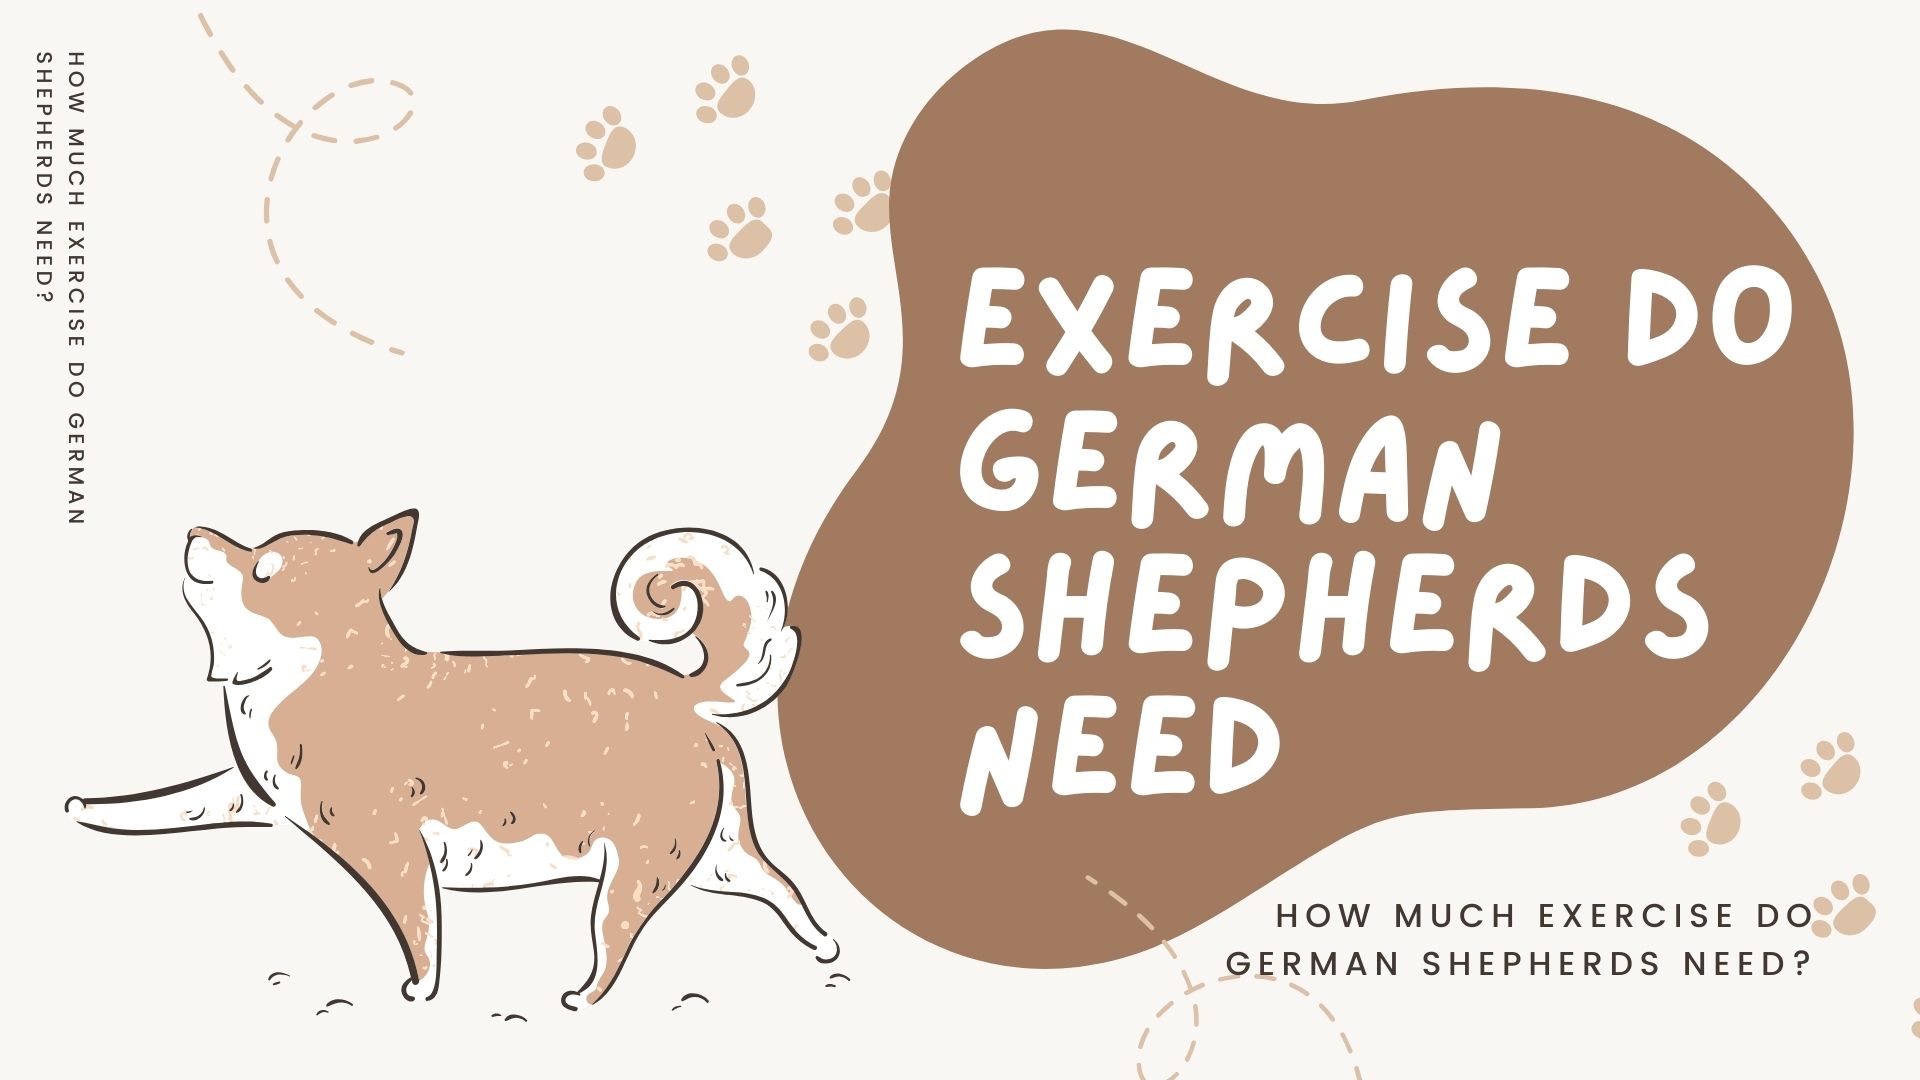 How Much Exercise Do German Shepherds Need